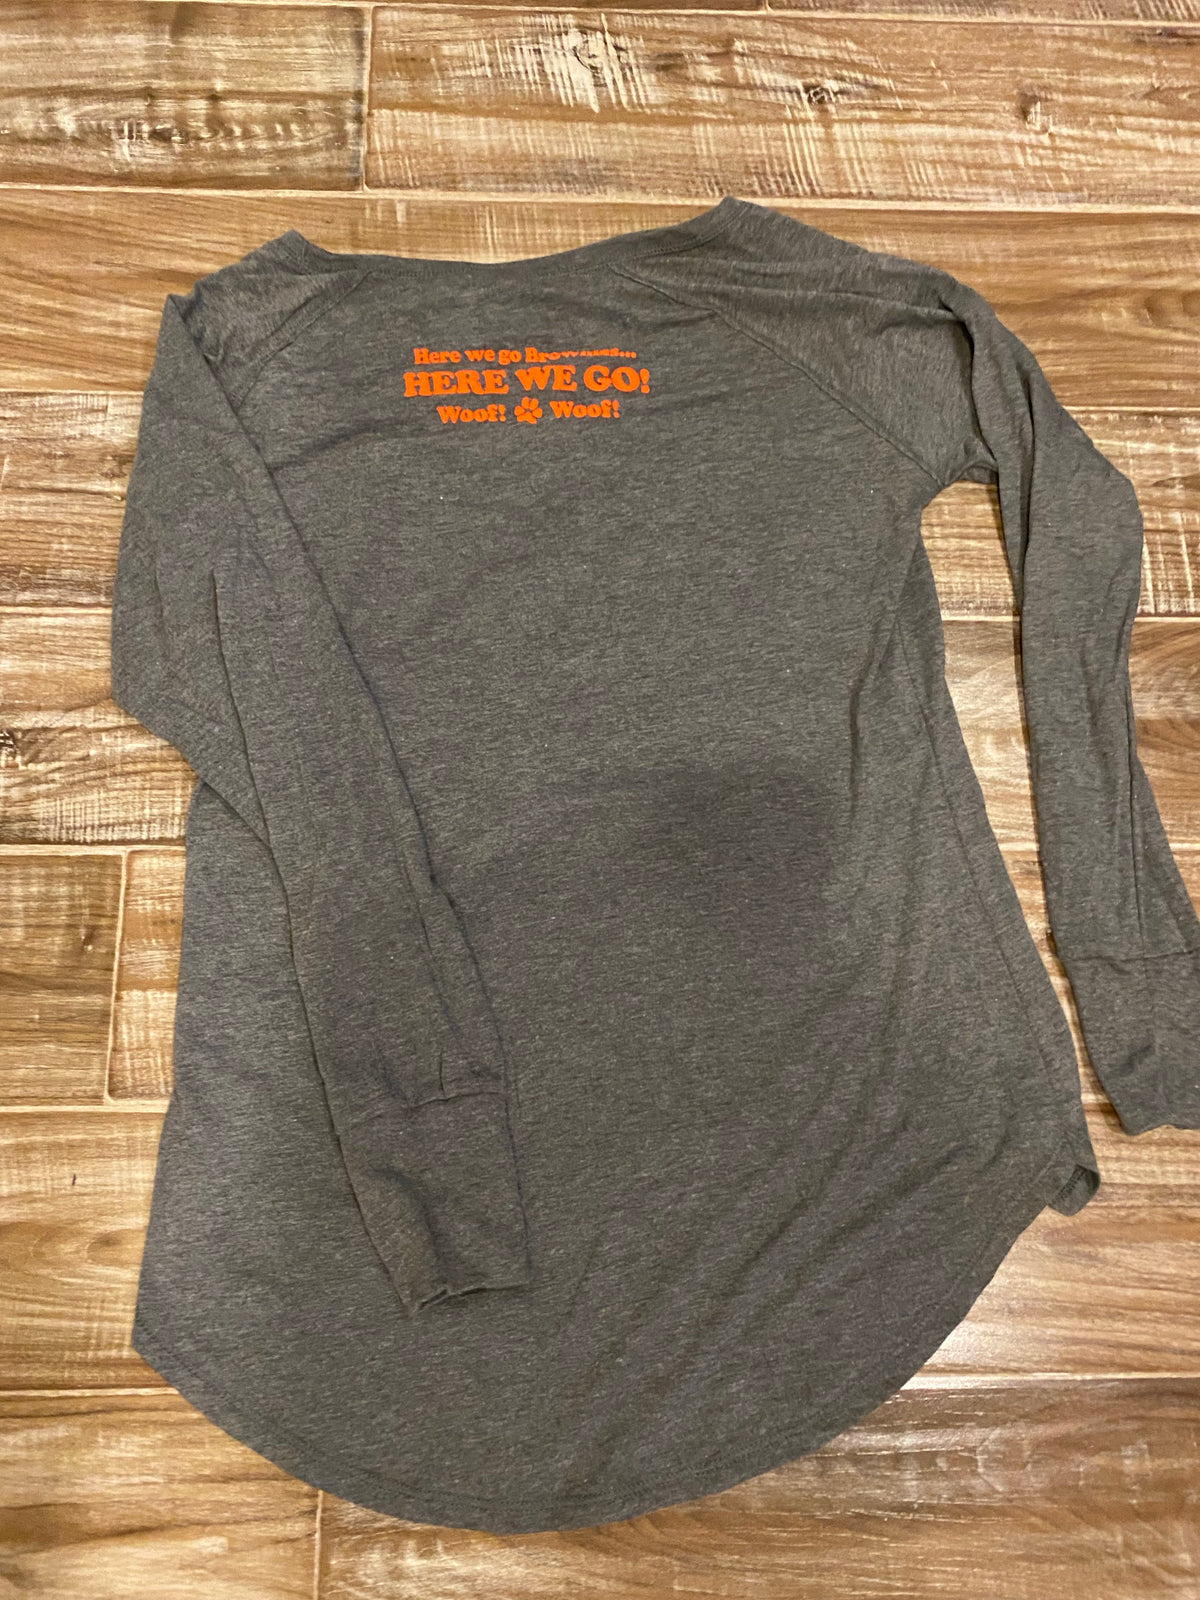 Born and Bred Browns fan LONG Sleeve tee